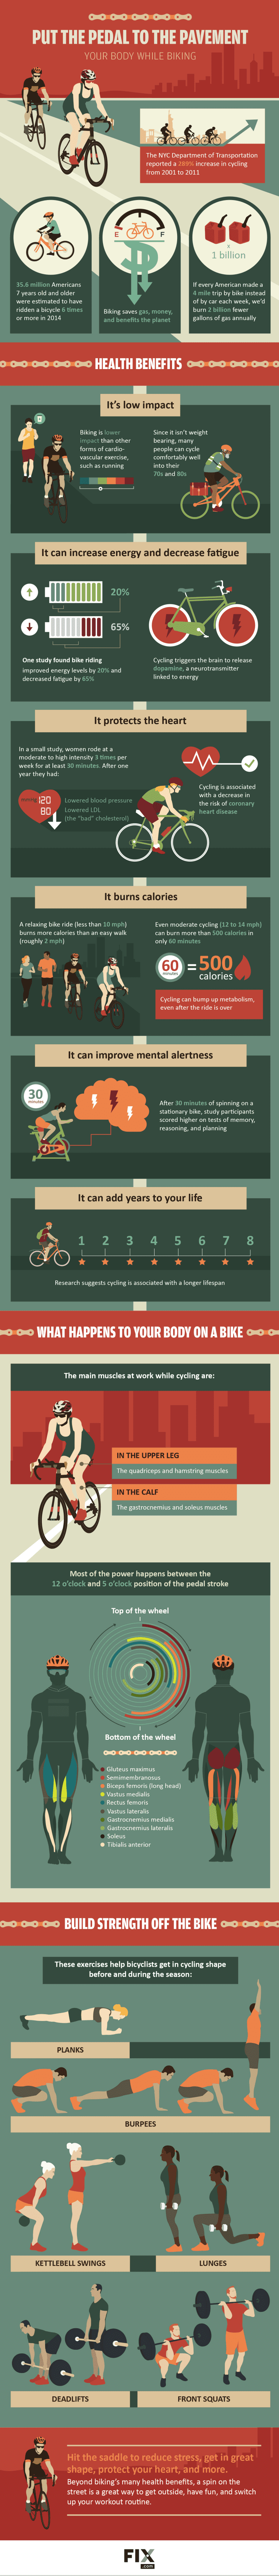 What REALLY Happens To Your Body When You're On A Bike (Infographic)